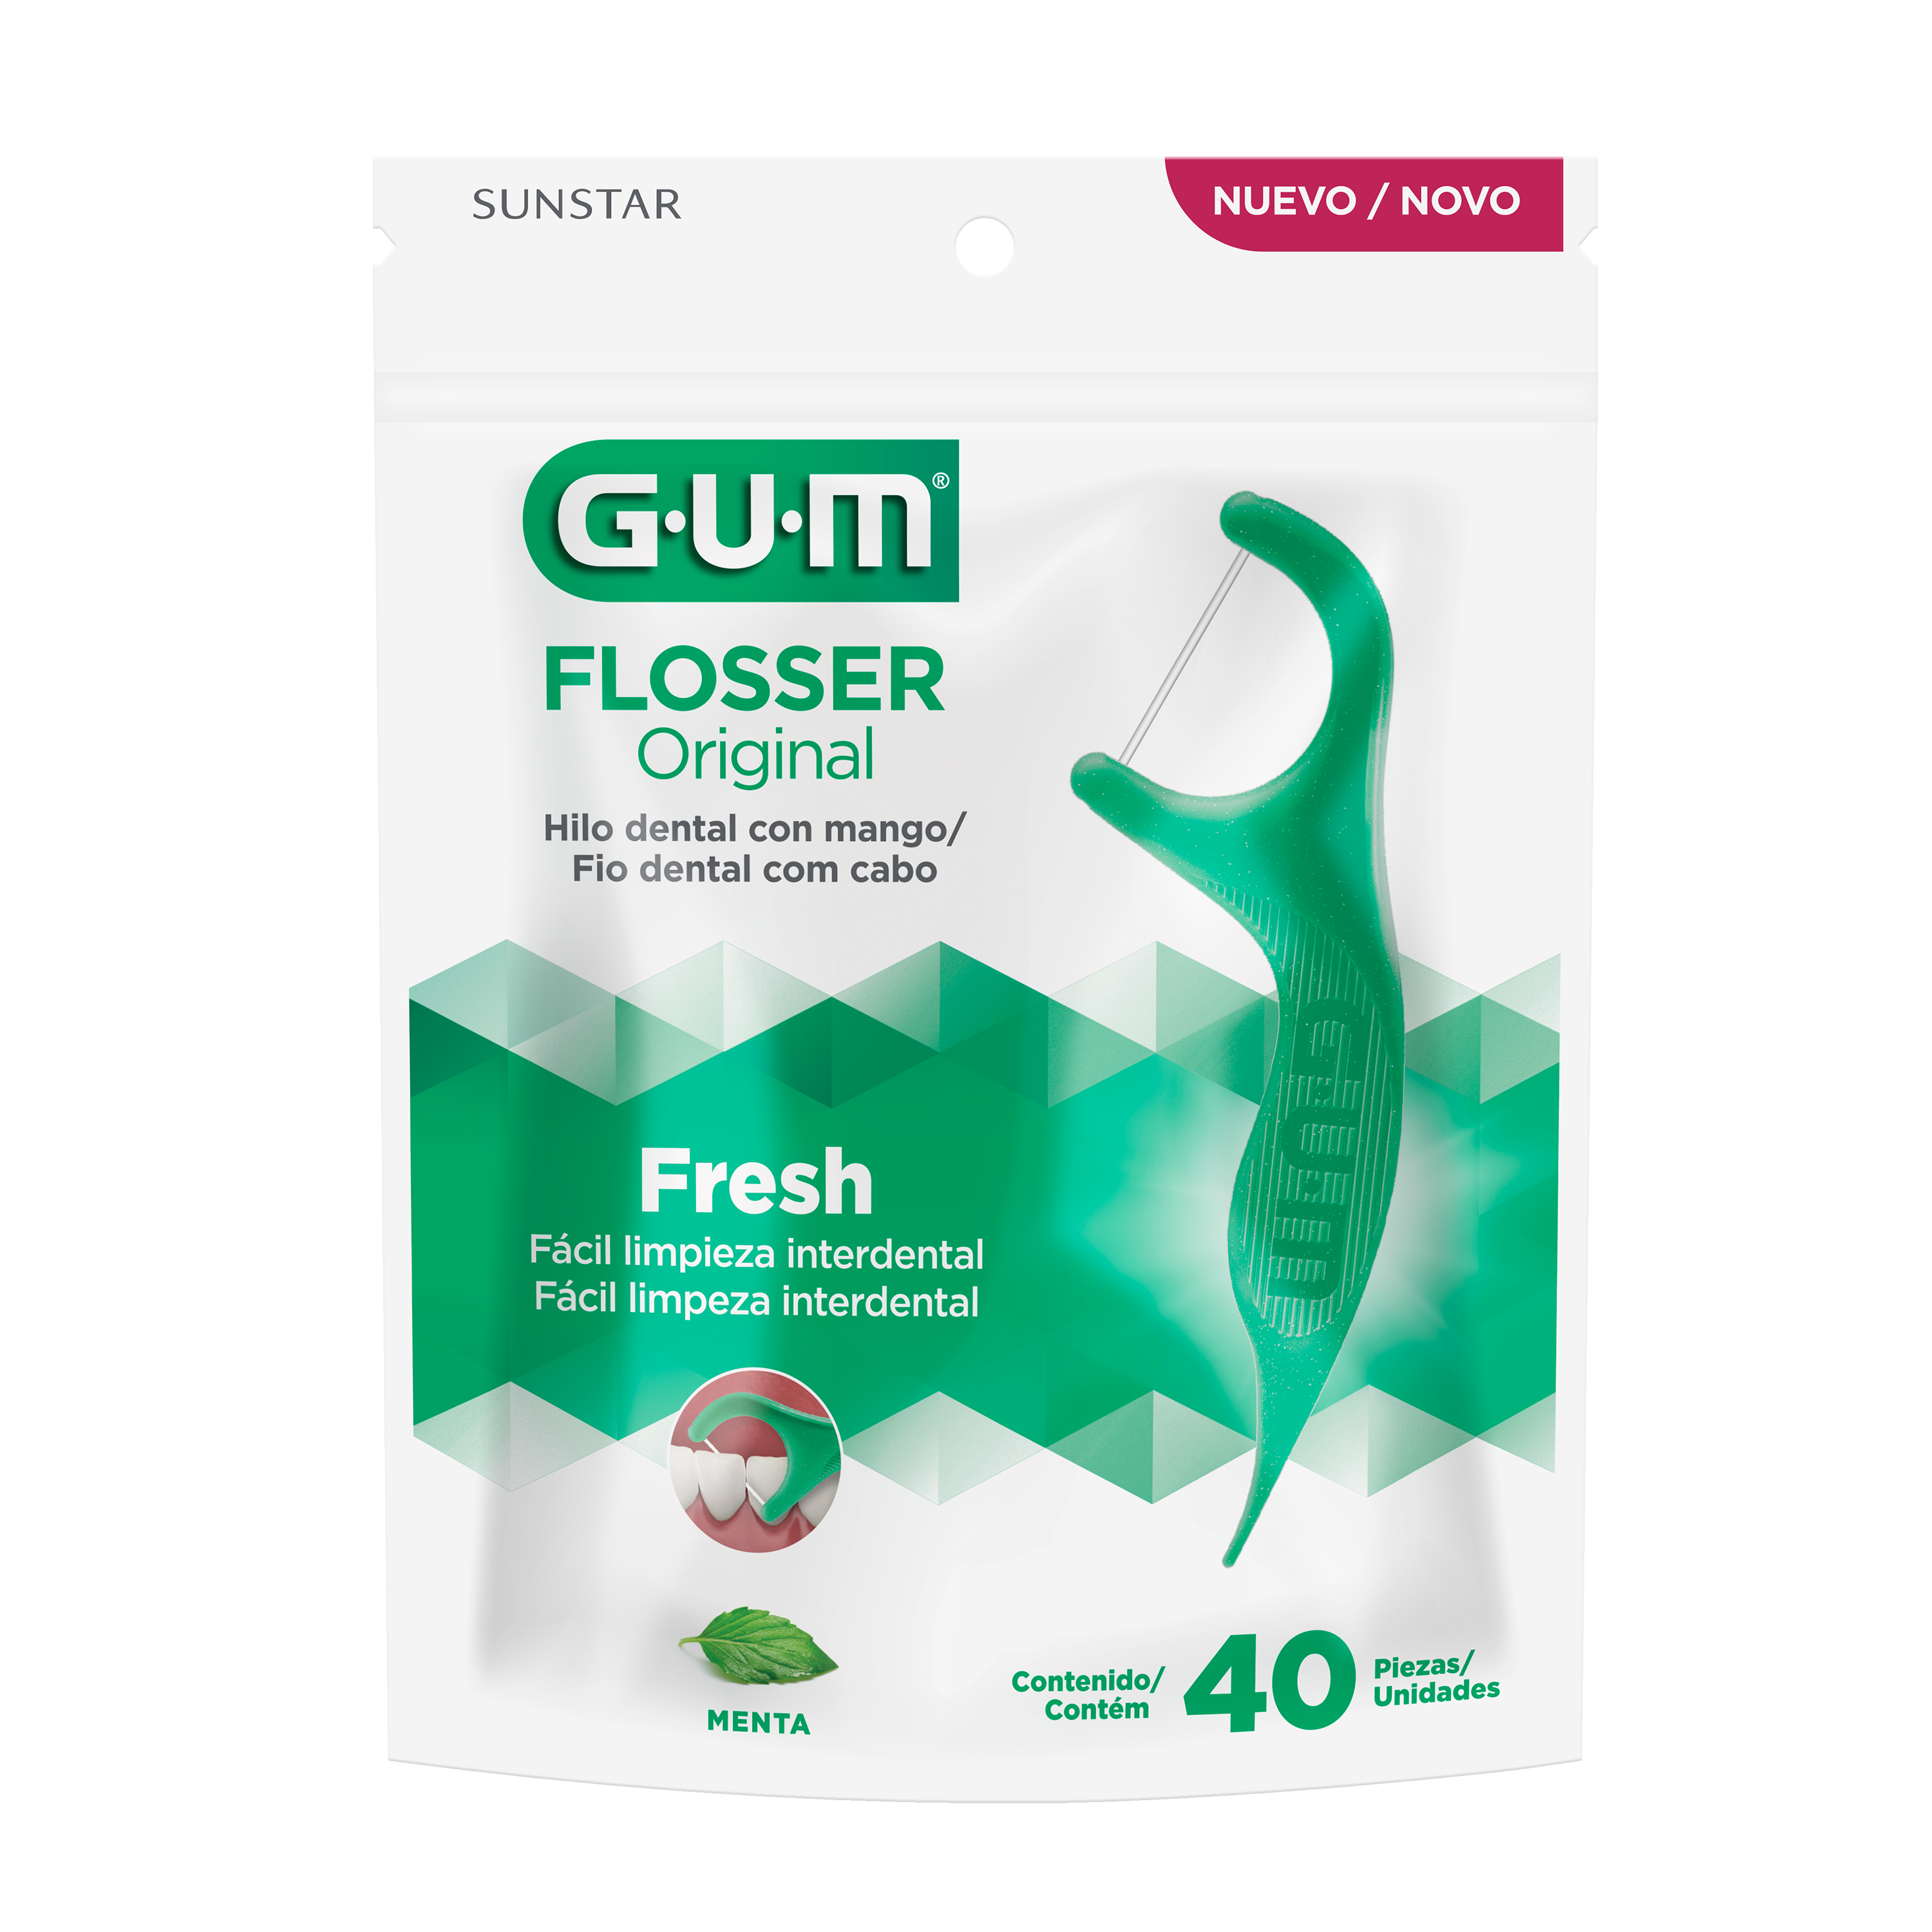 894LY4-Product-Packaging-Flossers-ProfessionalClean-front-40ct.png